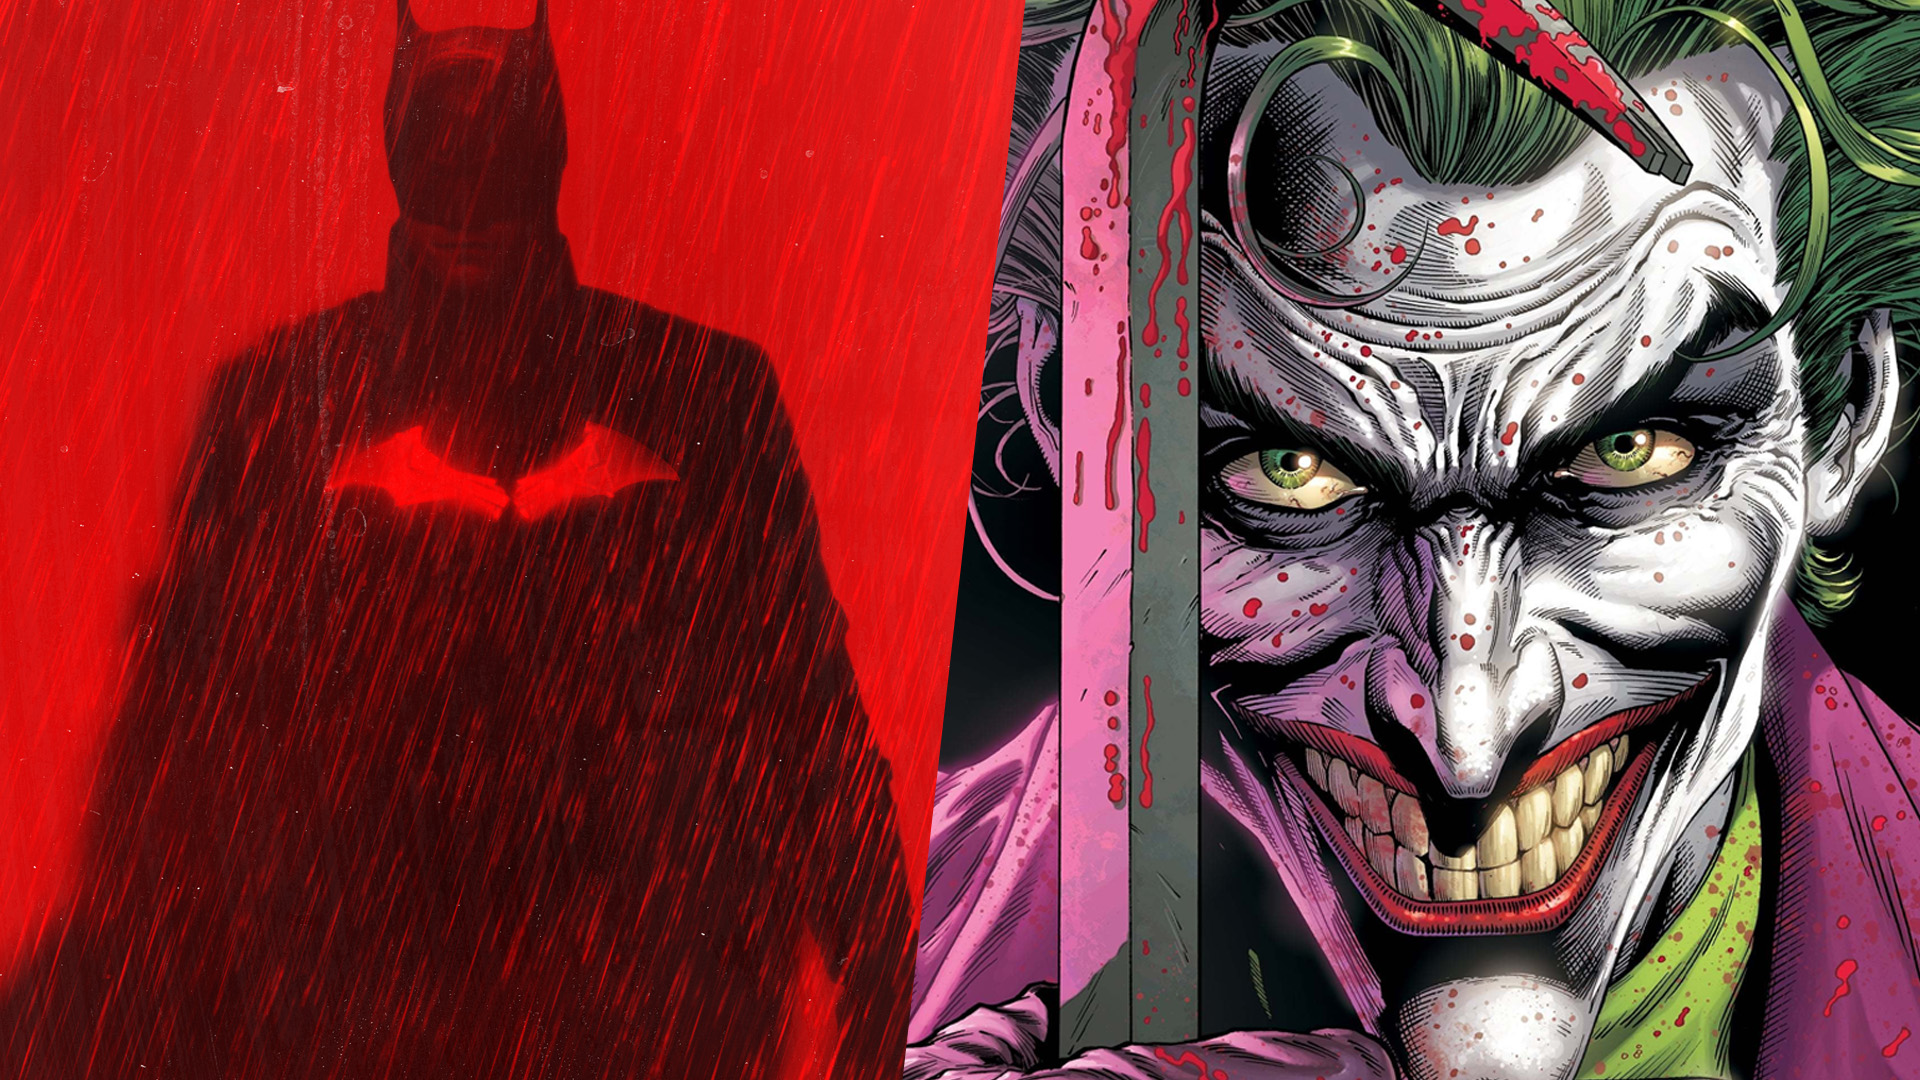 New Batman trailer teases first image of new Joker – and we know who it is  | T3